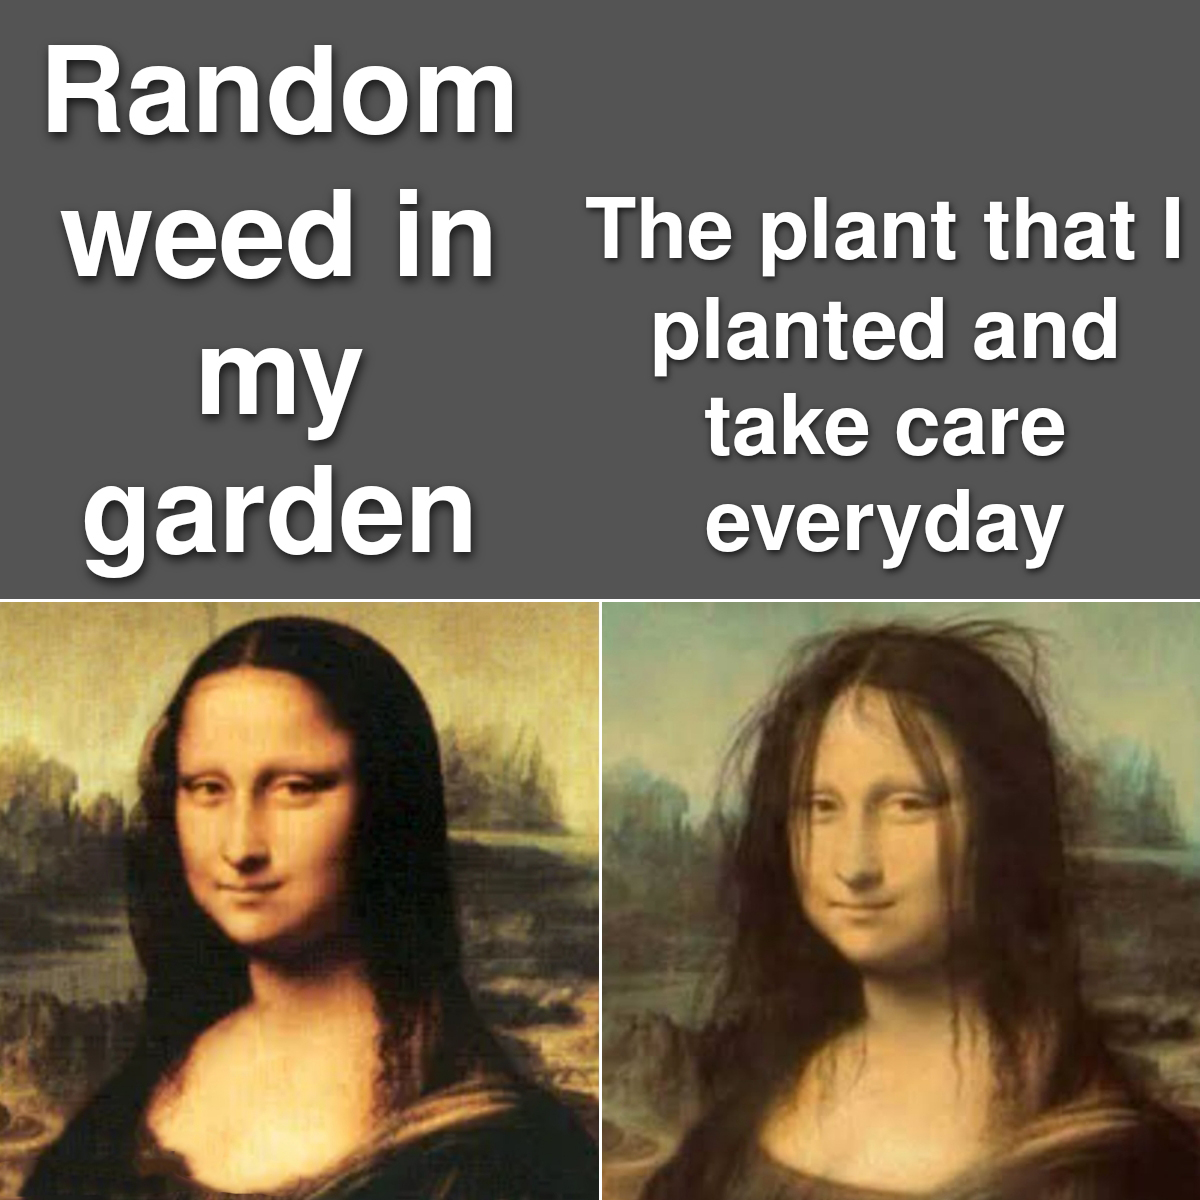 mona lisa painting - Random weed in The plant that I my planted and take care garden everyday